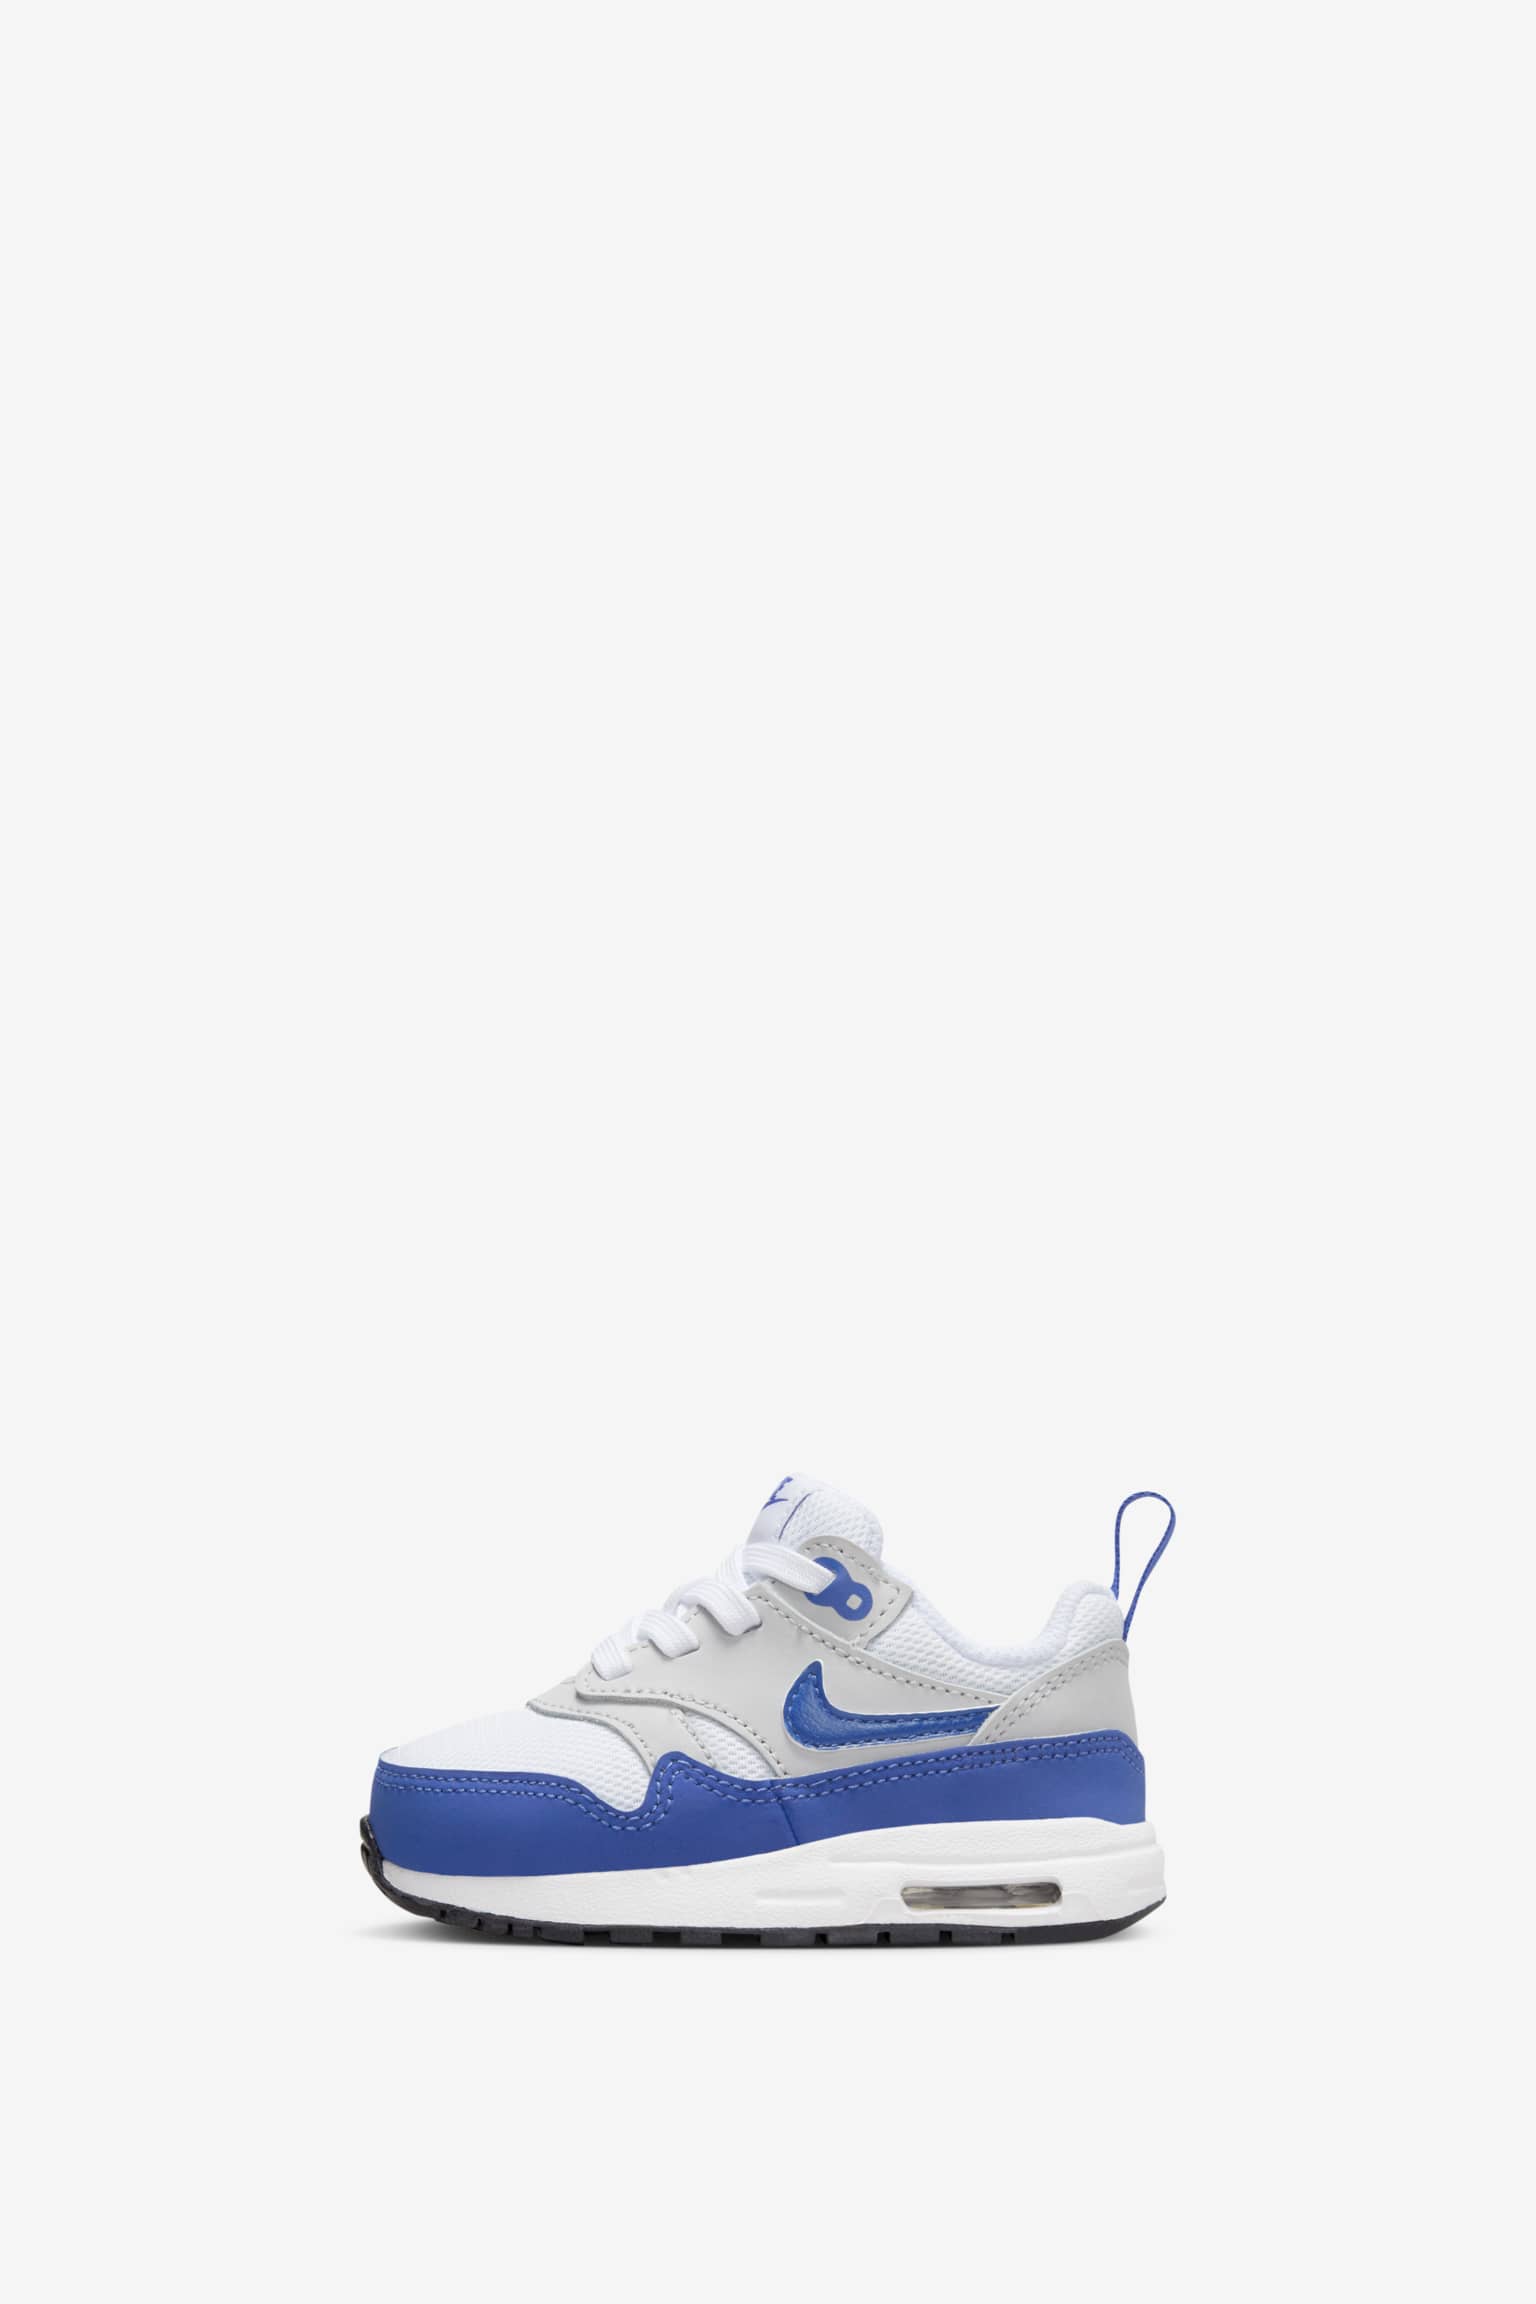 Air Max 1 '86 'Royal Blue' (DO9844-101) Release Date. Nike SNKRS